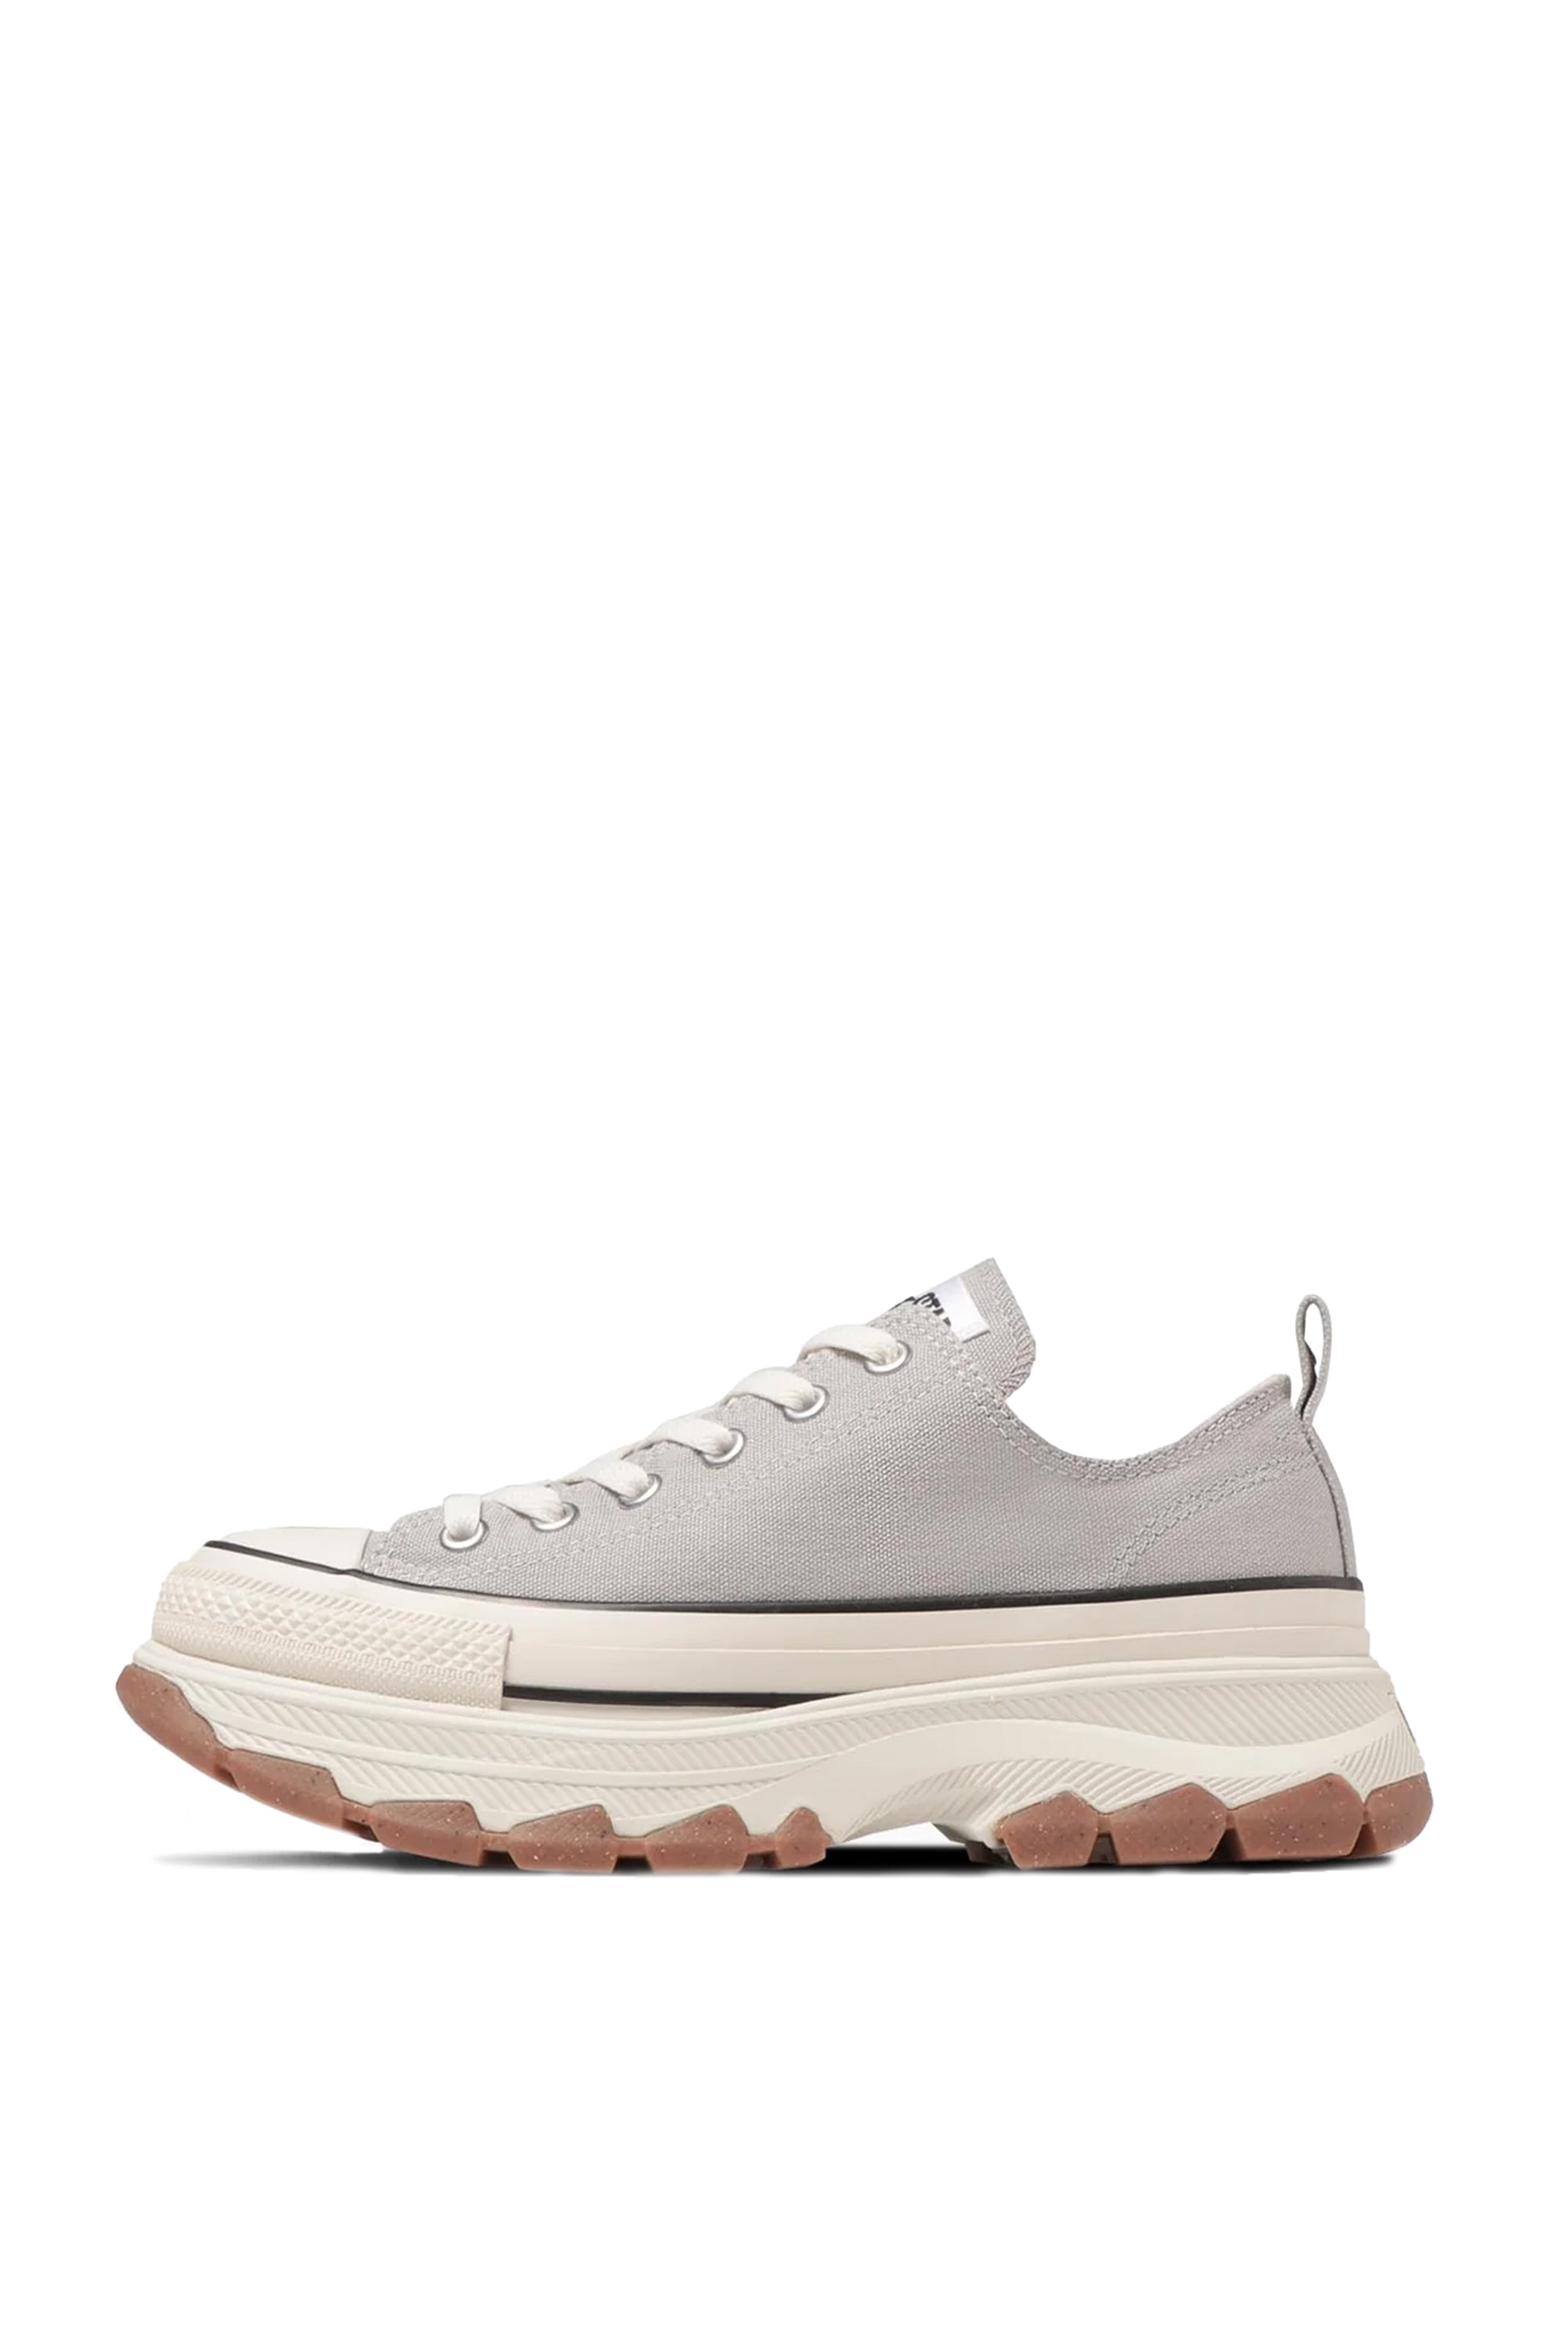 CONVERSE SS23 ALL STAR TREKWAVE OX / ICE GRY - NUBIAN